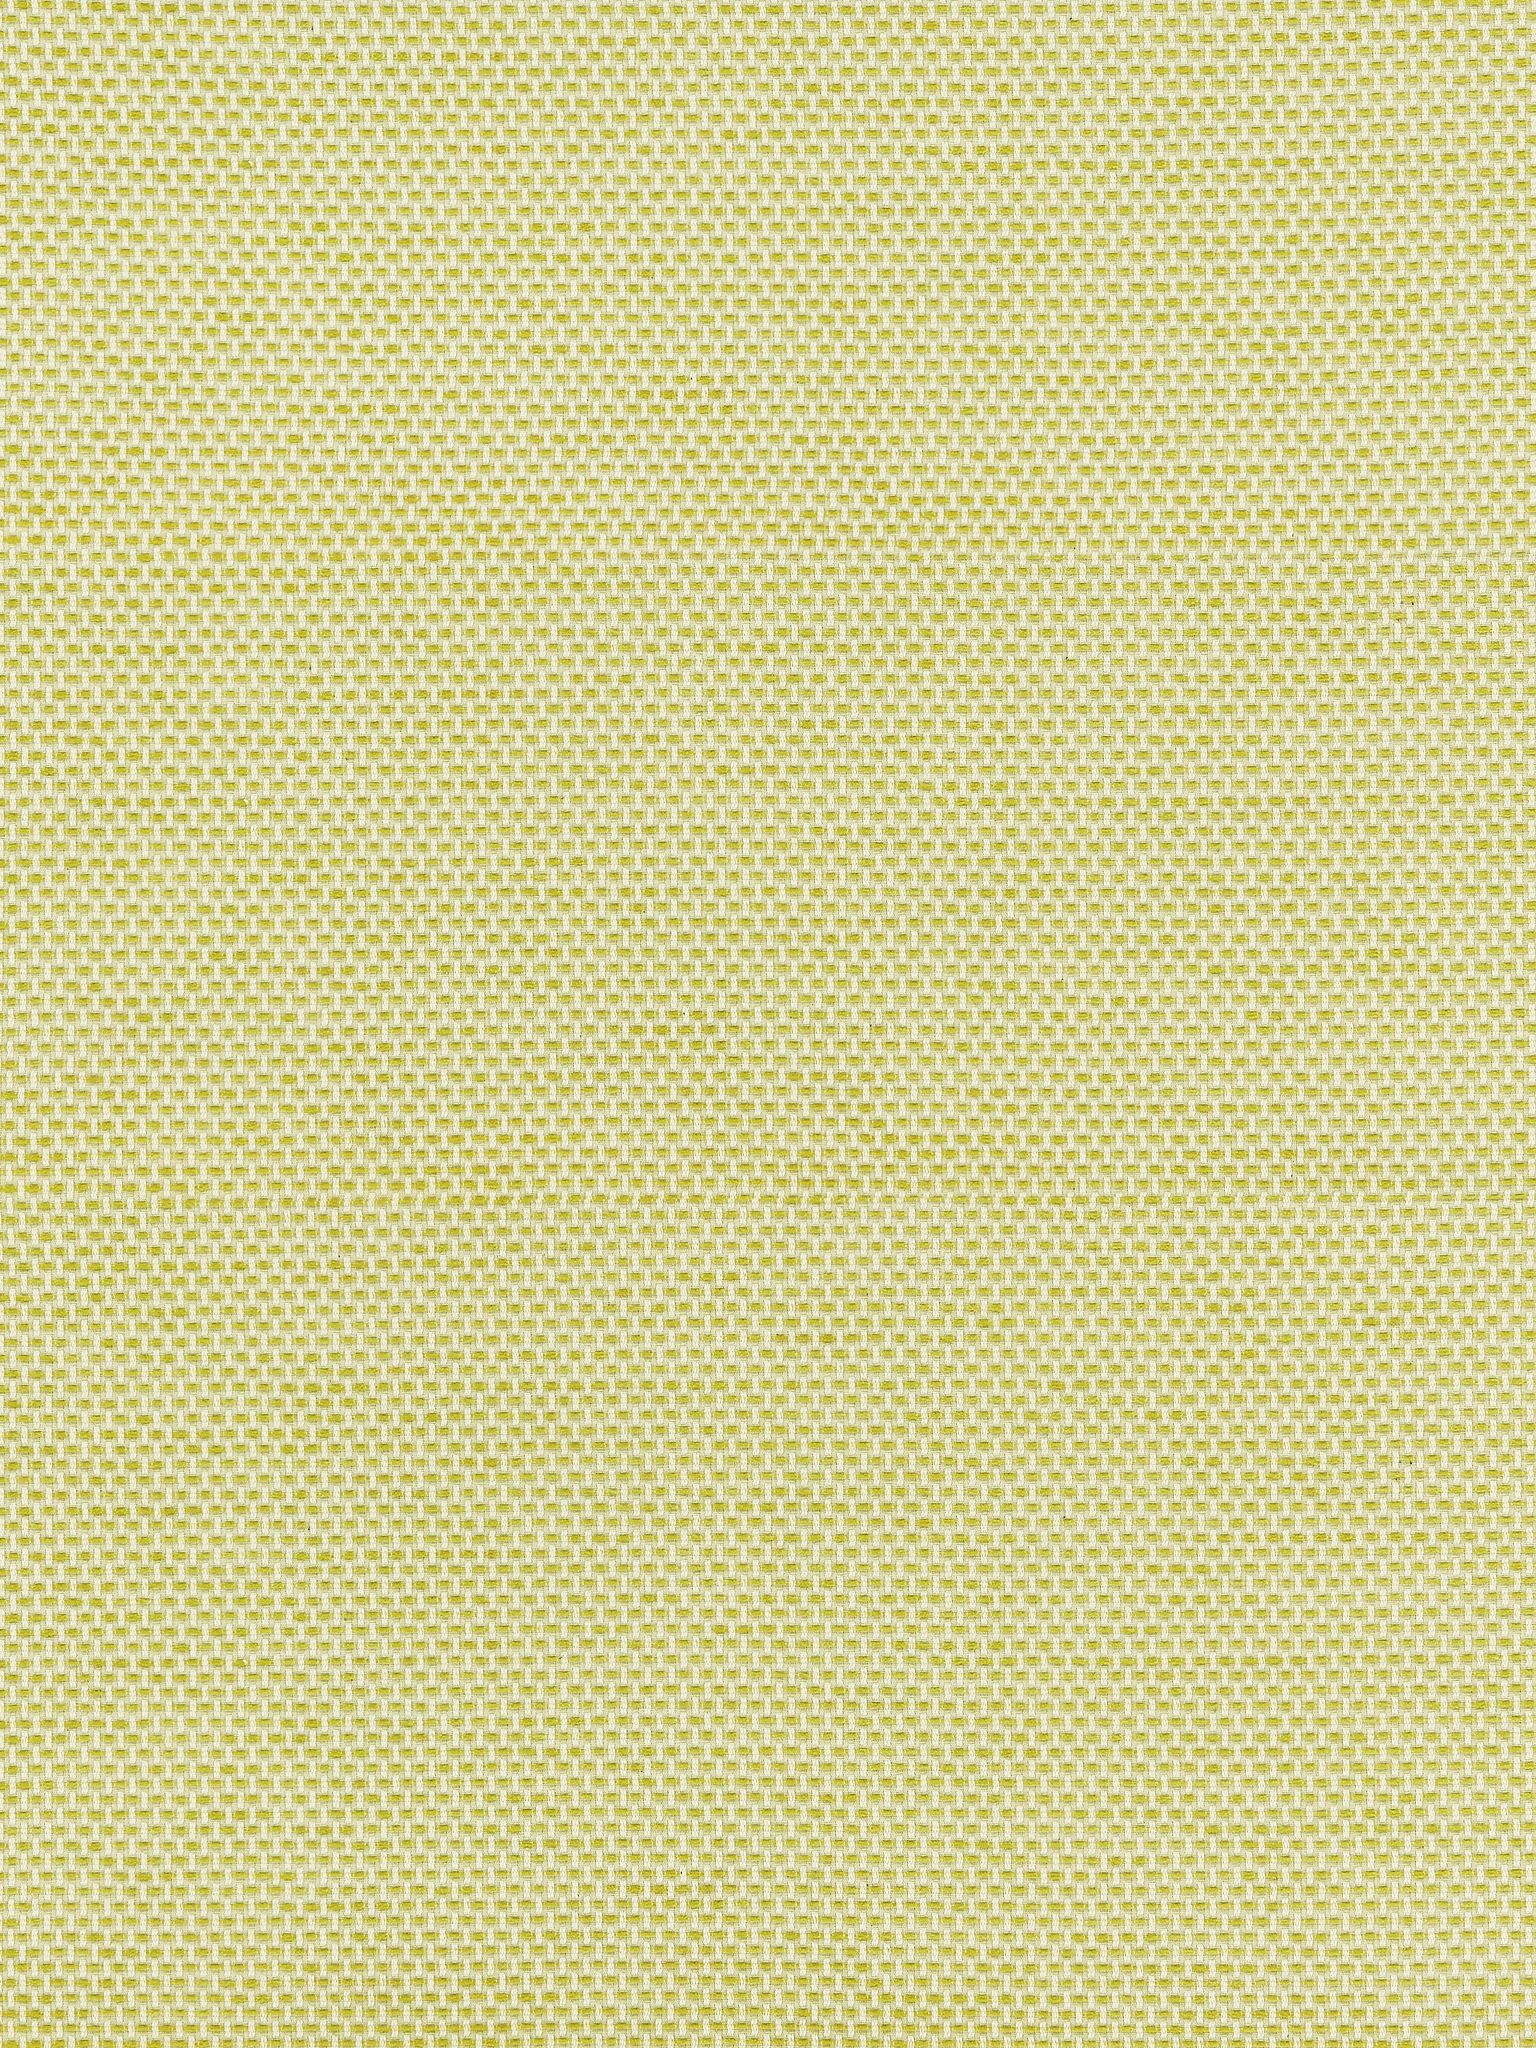 Berkshire Weave fabric in lime color - pattern number BK 0005K65115 - by Scalamandre in the Old World Weavers collection